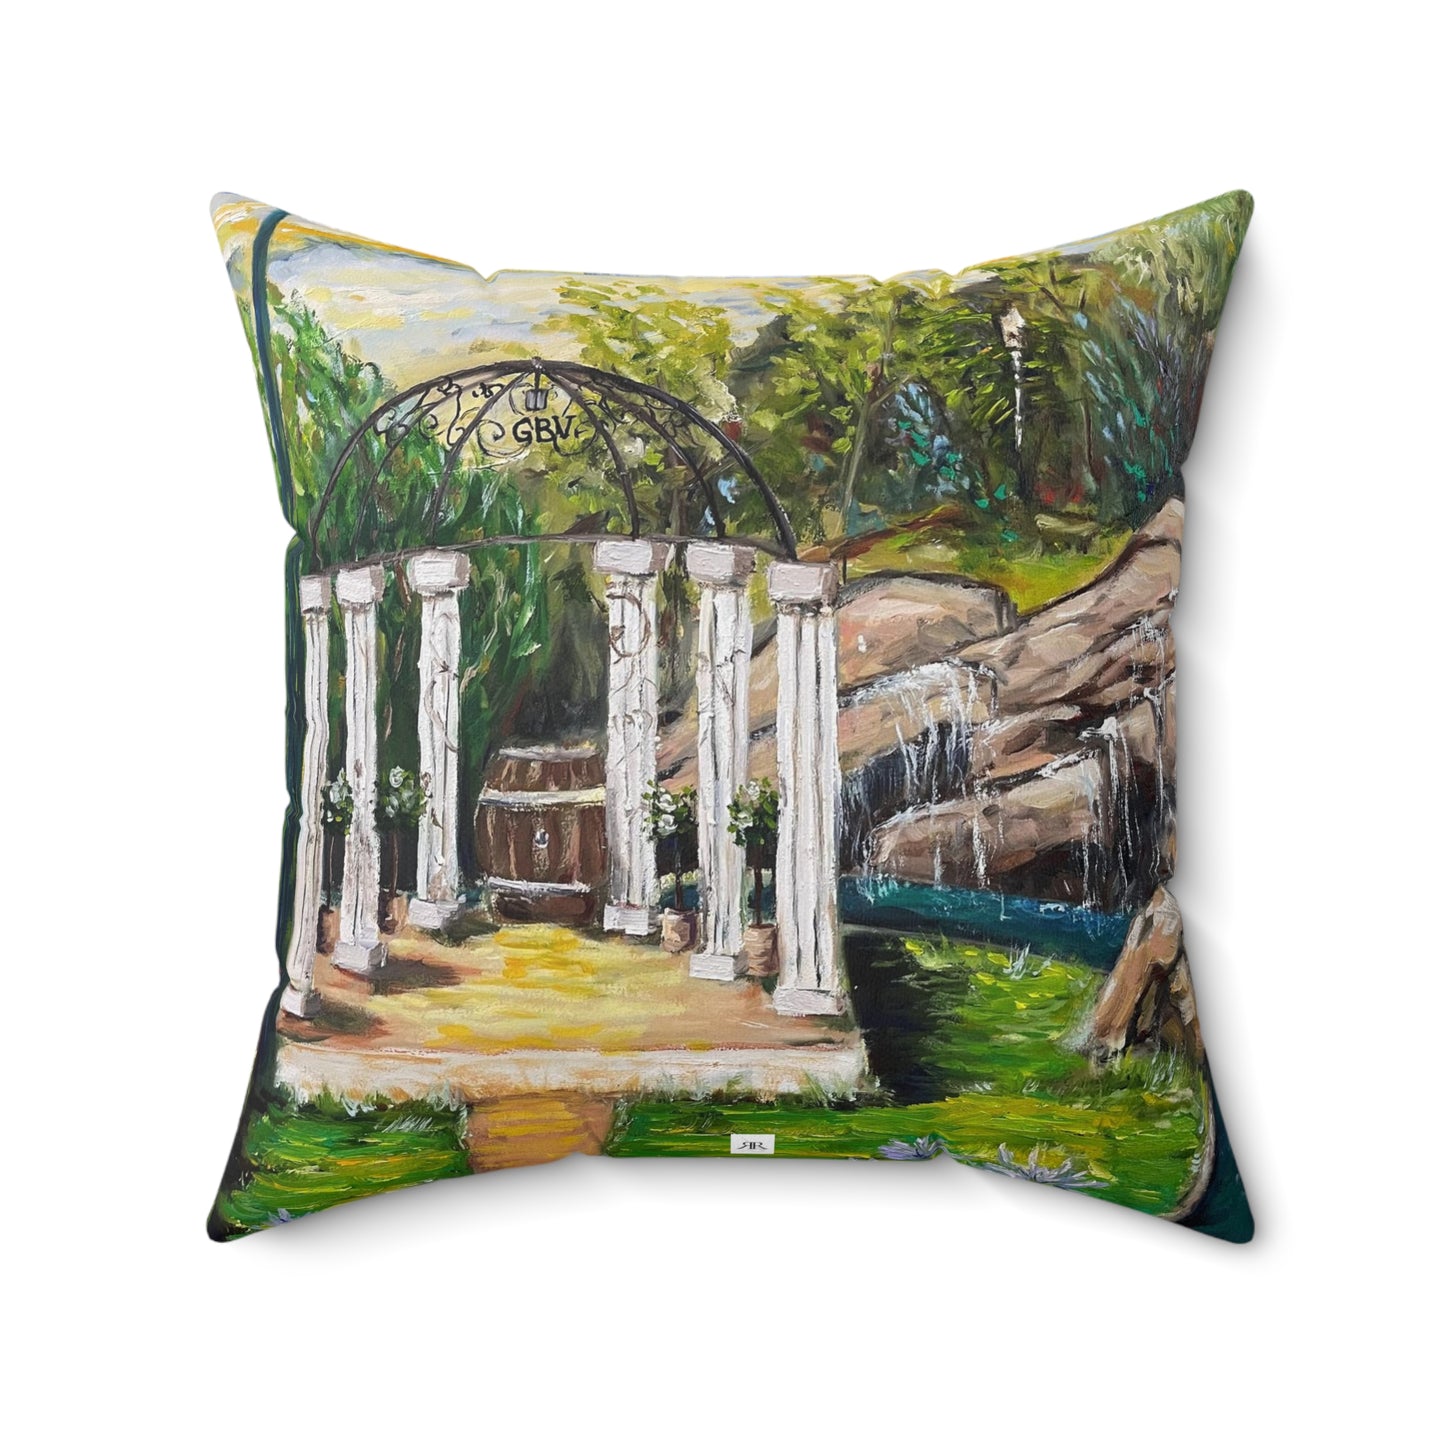 The Pergola (Wedding Alter) at GBV Indoor Spun Polyester Square Pillow